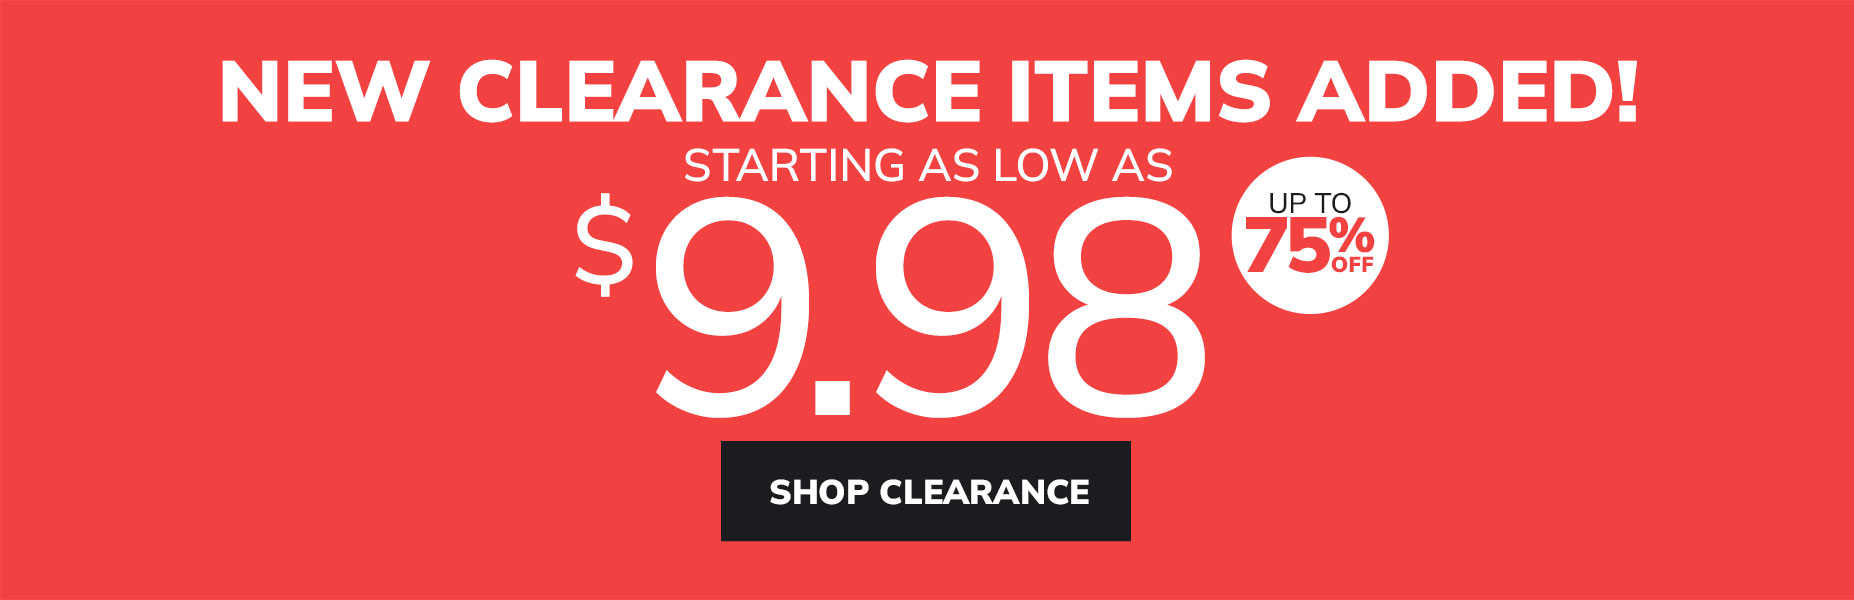 new clearance items added starting as low as $9.98 - upto 75% off